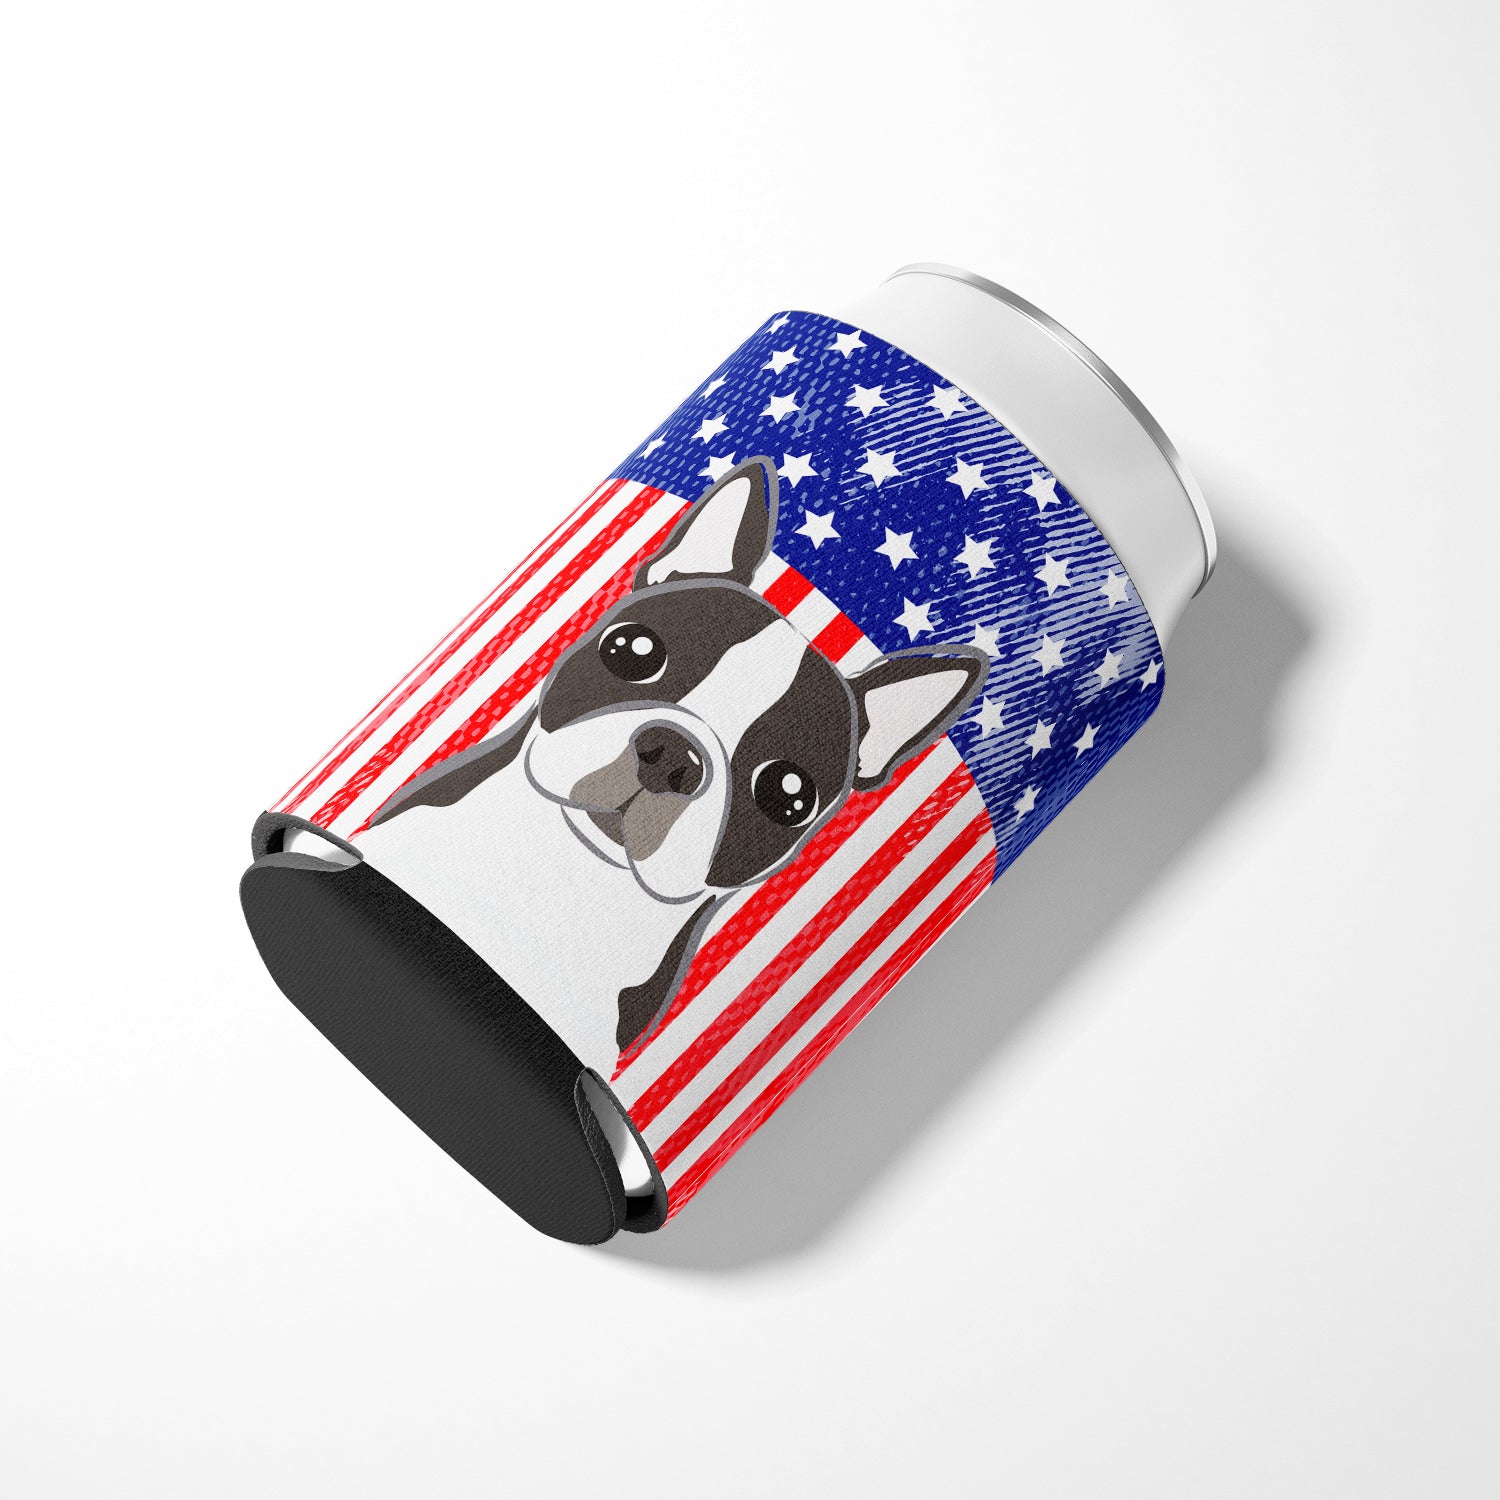 American Flag and Boston Terrier Can or Bottle Hugger BB2133CC